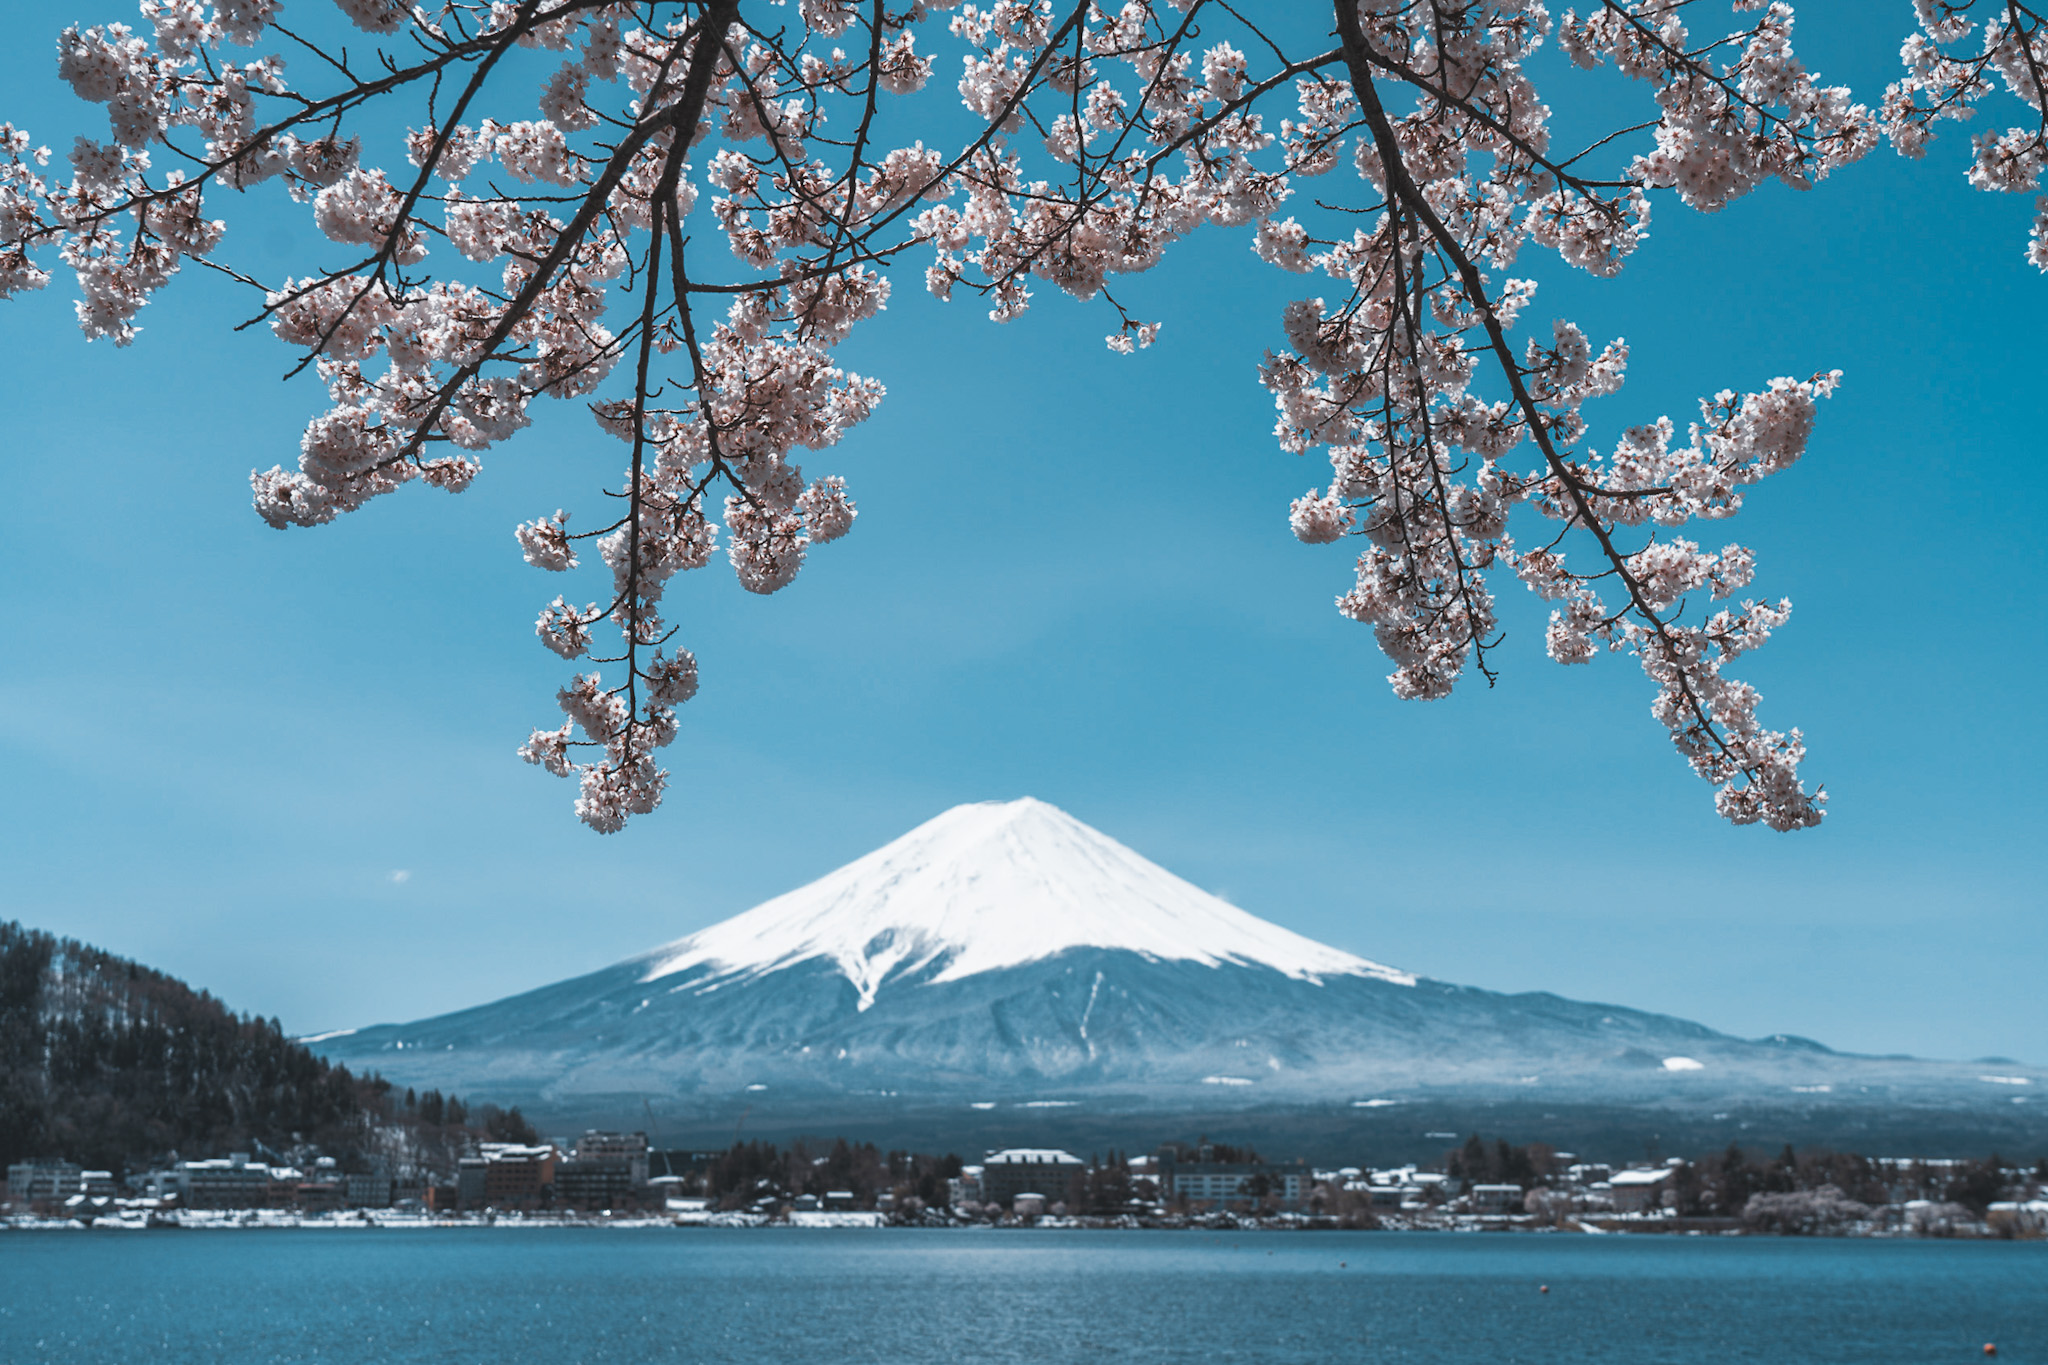 view of Mt. Fuji in Hakone, Japan with Annie Miller